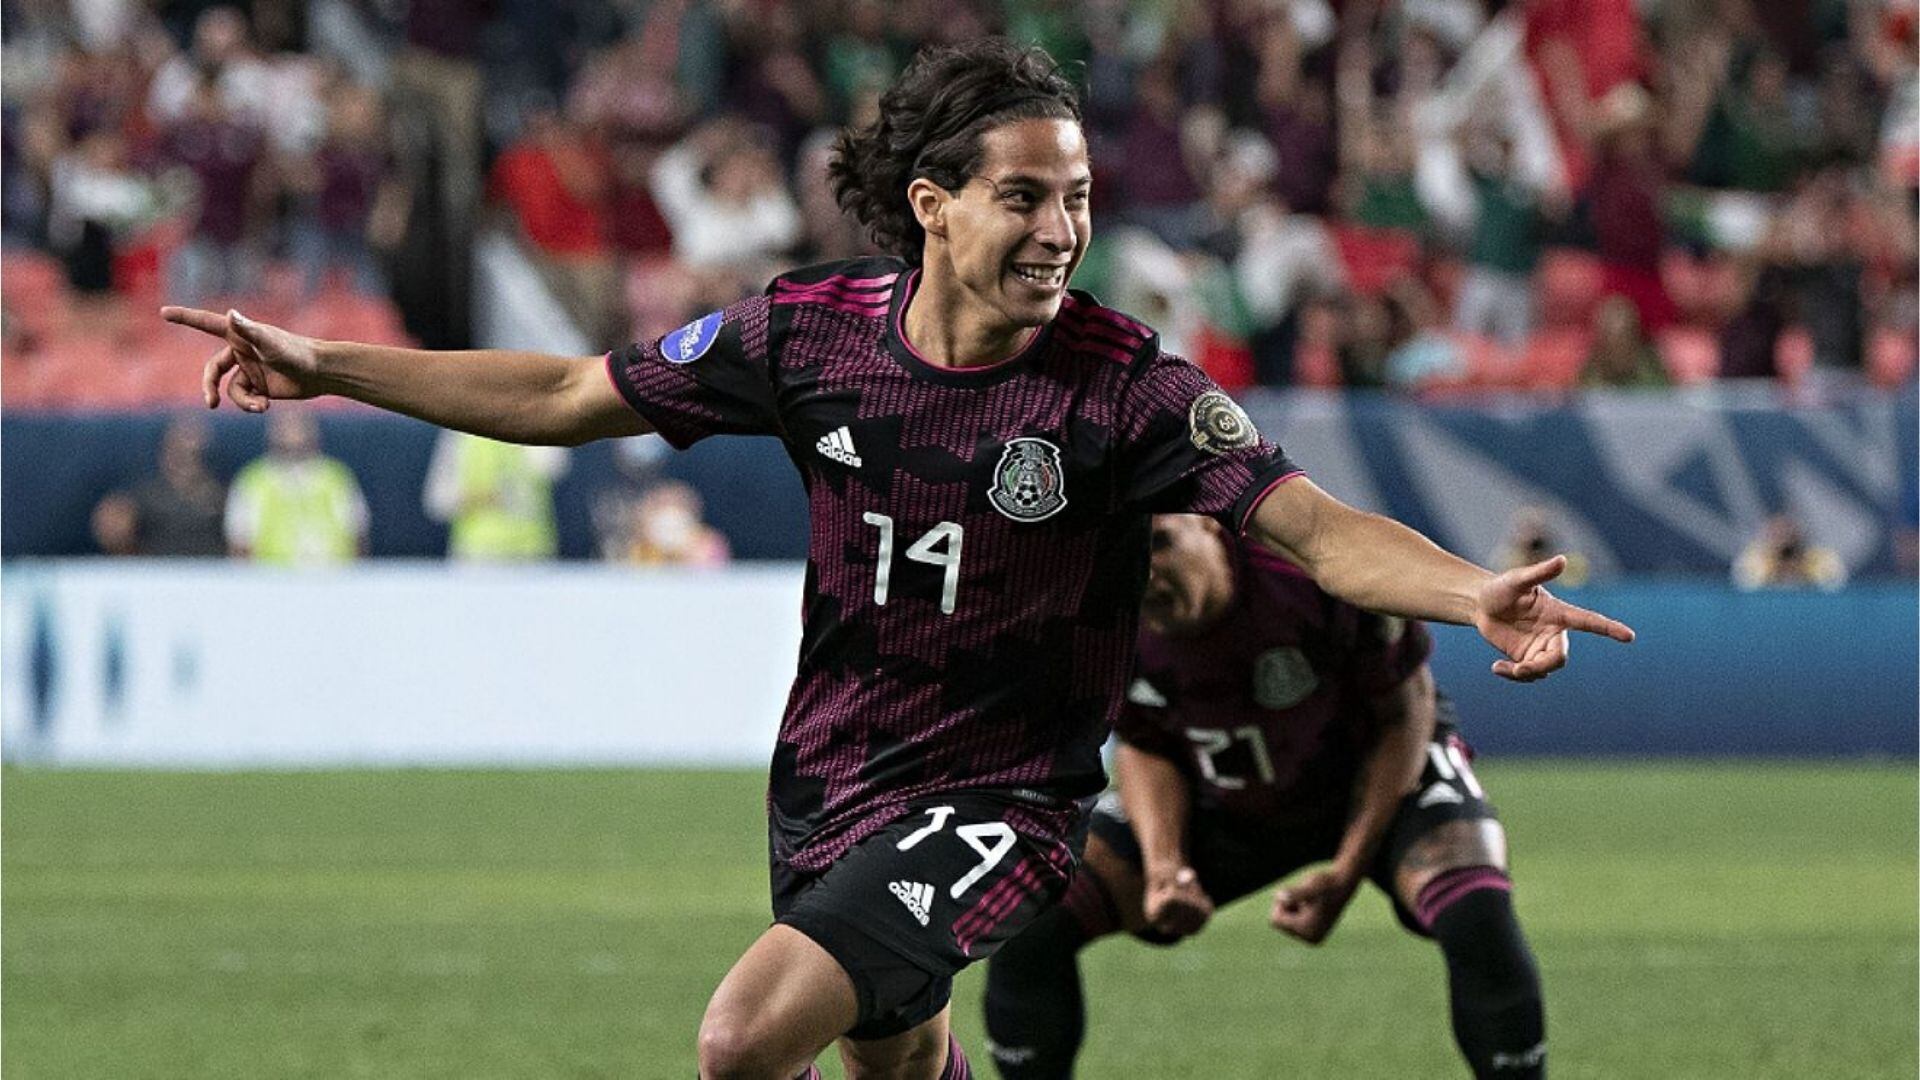 After the penalty he received, this is Diego Lainez’s new nickname